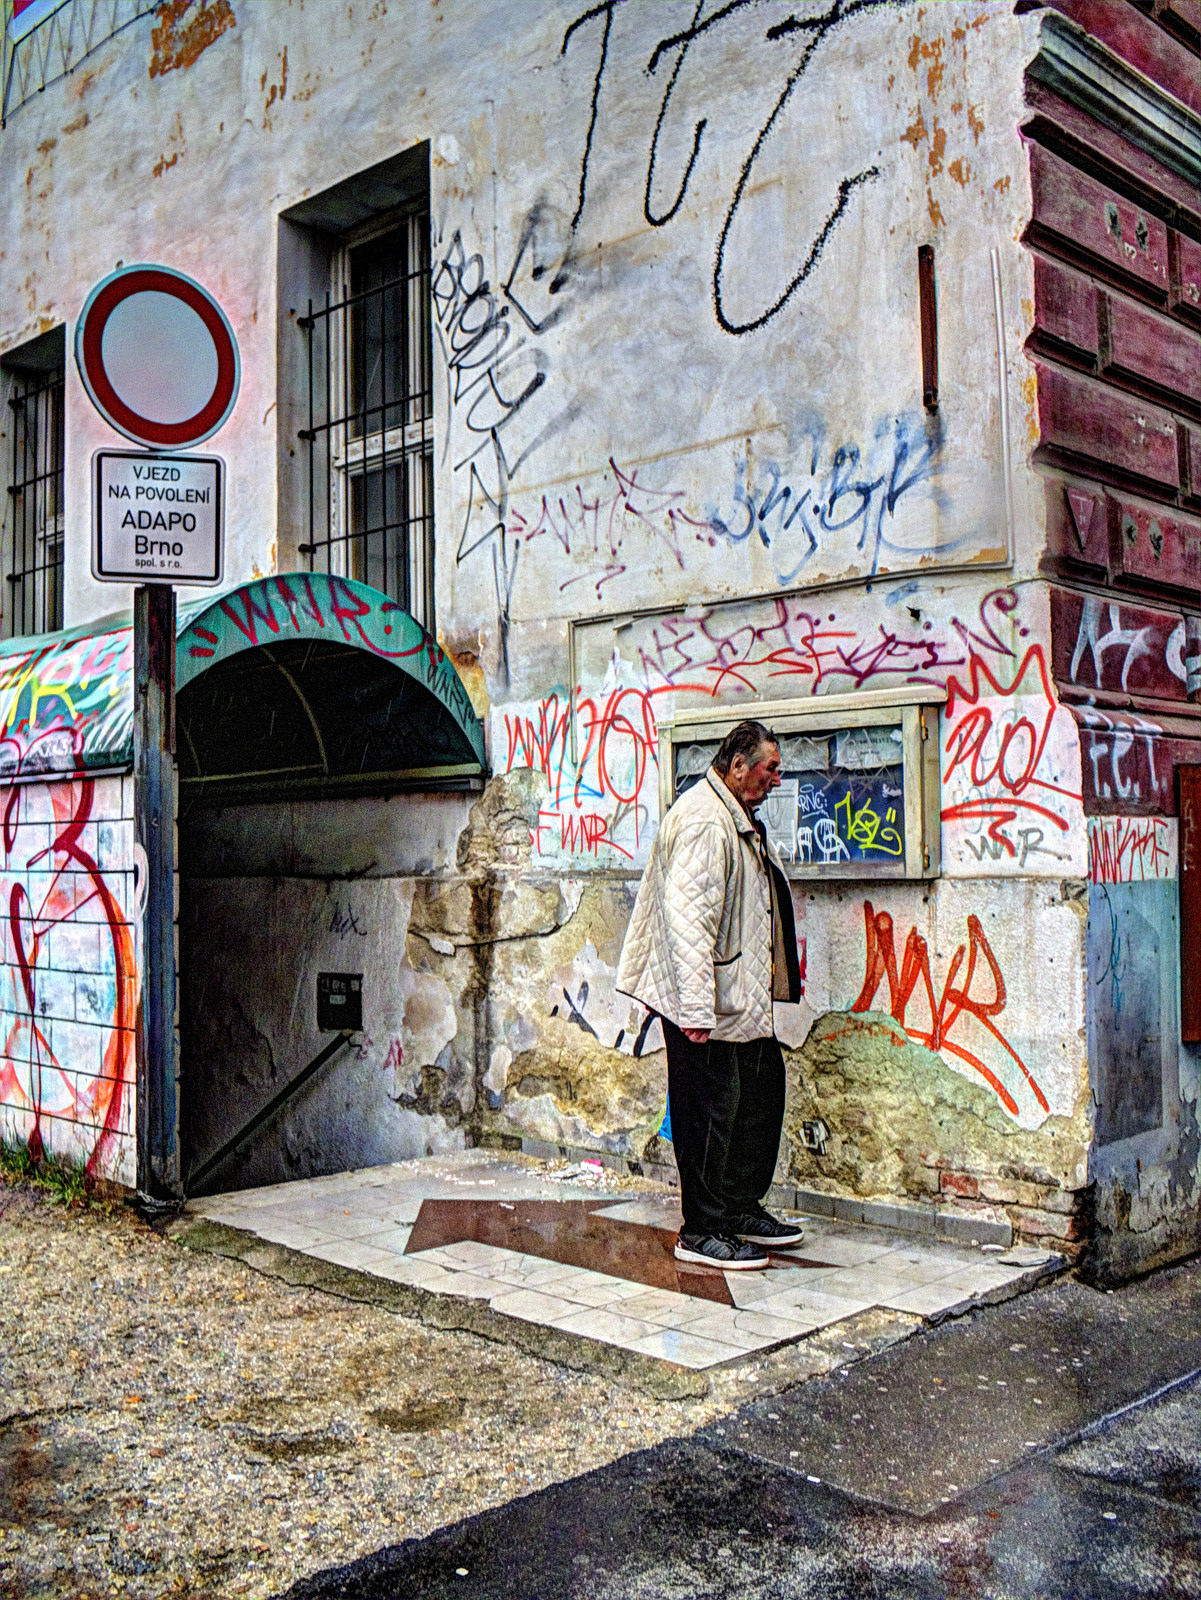 Elderly Man Surrounded by Graffitis - Surreal Version